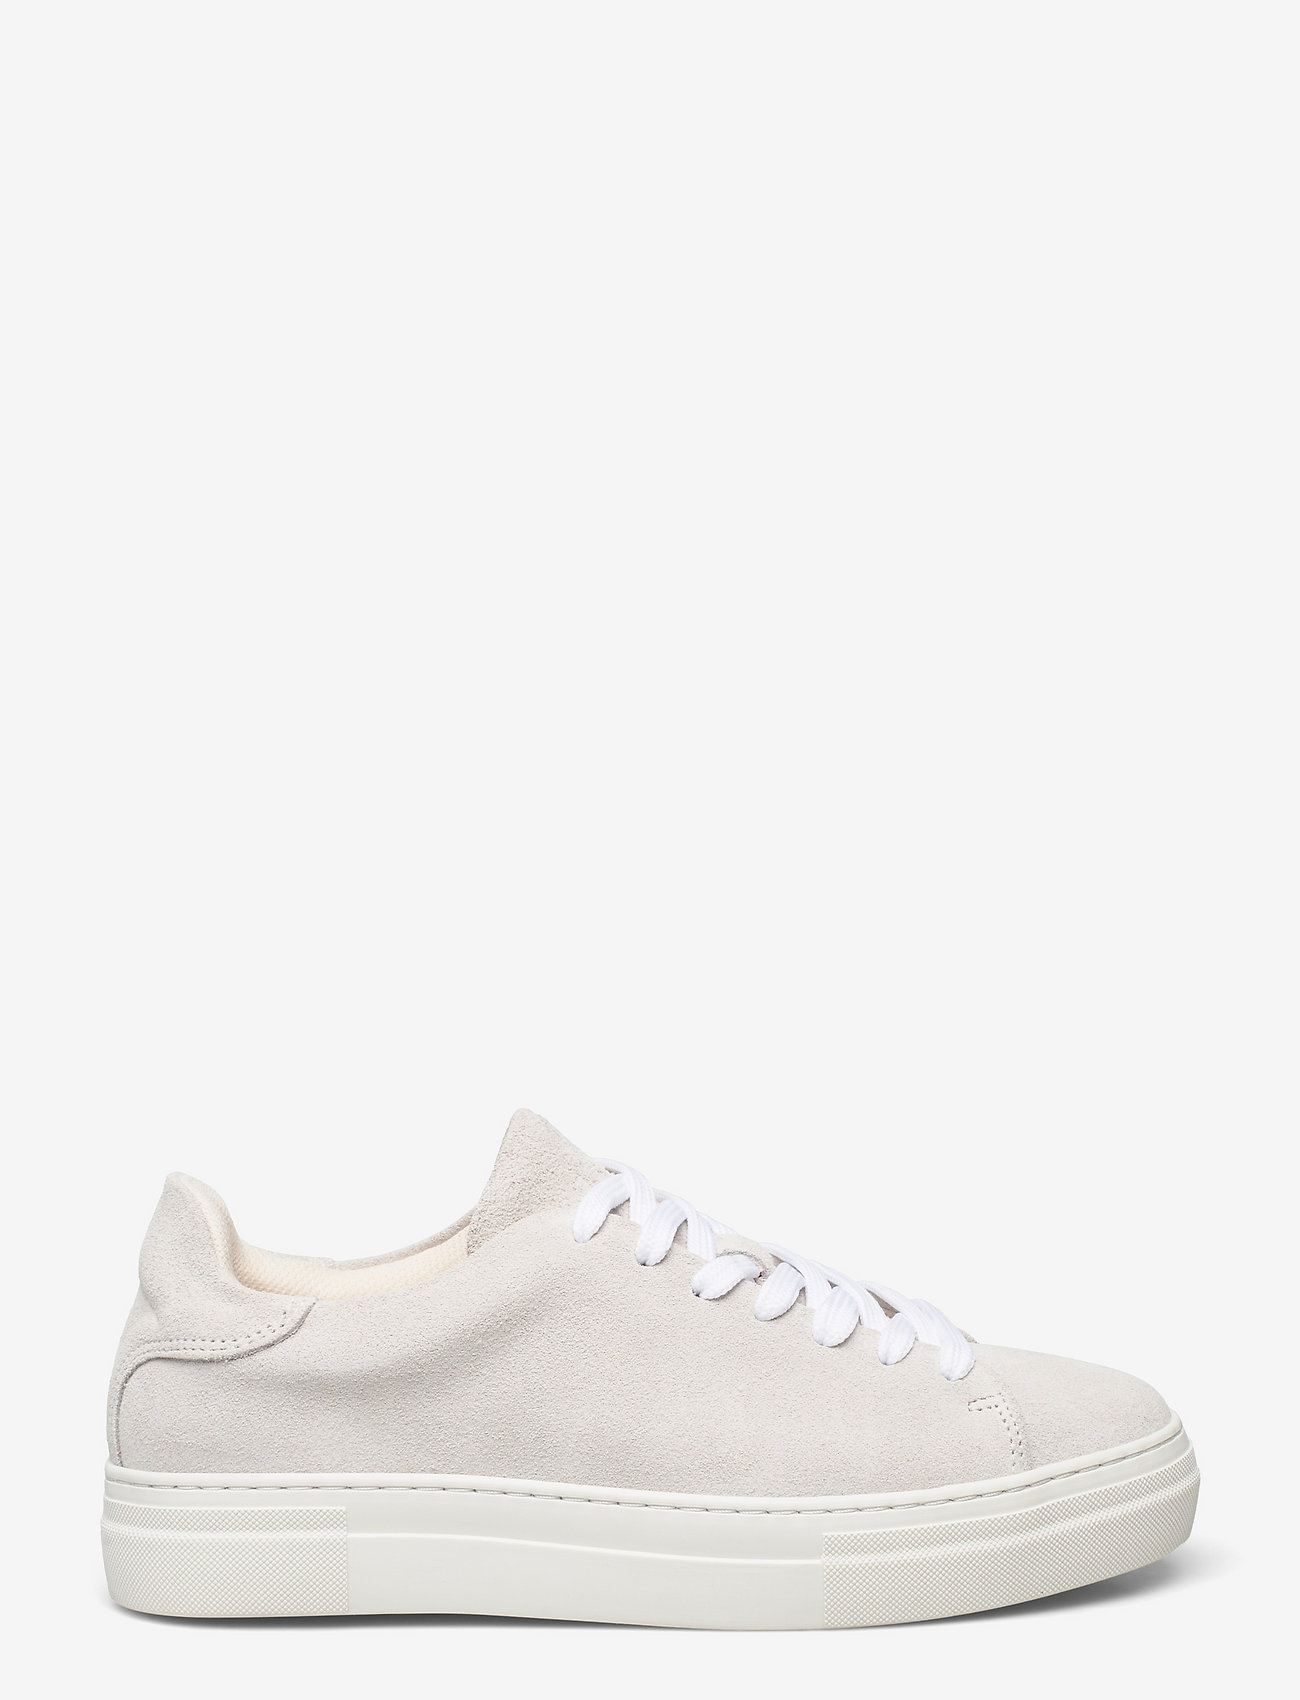 Selected Homme - SLHDAVID CHUNKY SUEDE SNEAKER NOOS O - low tops - white - 1